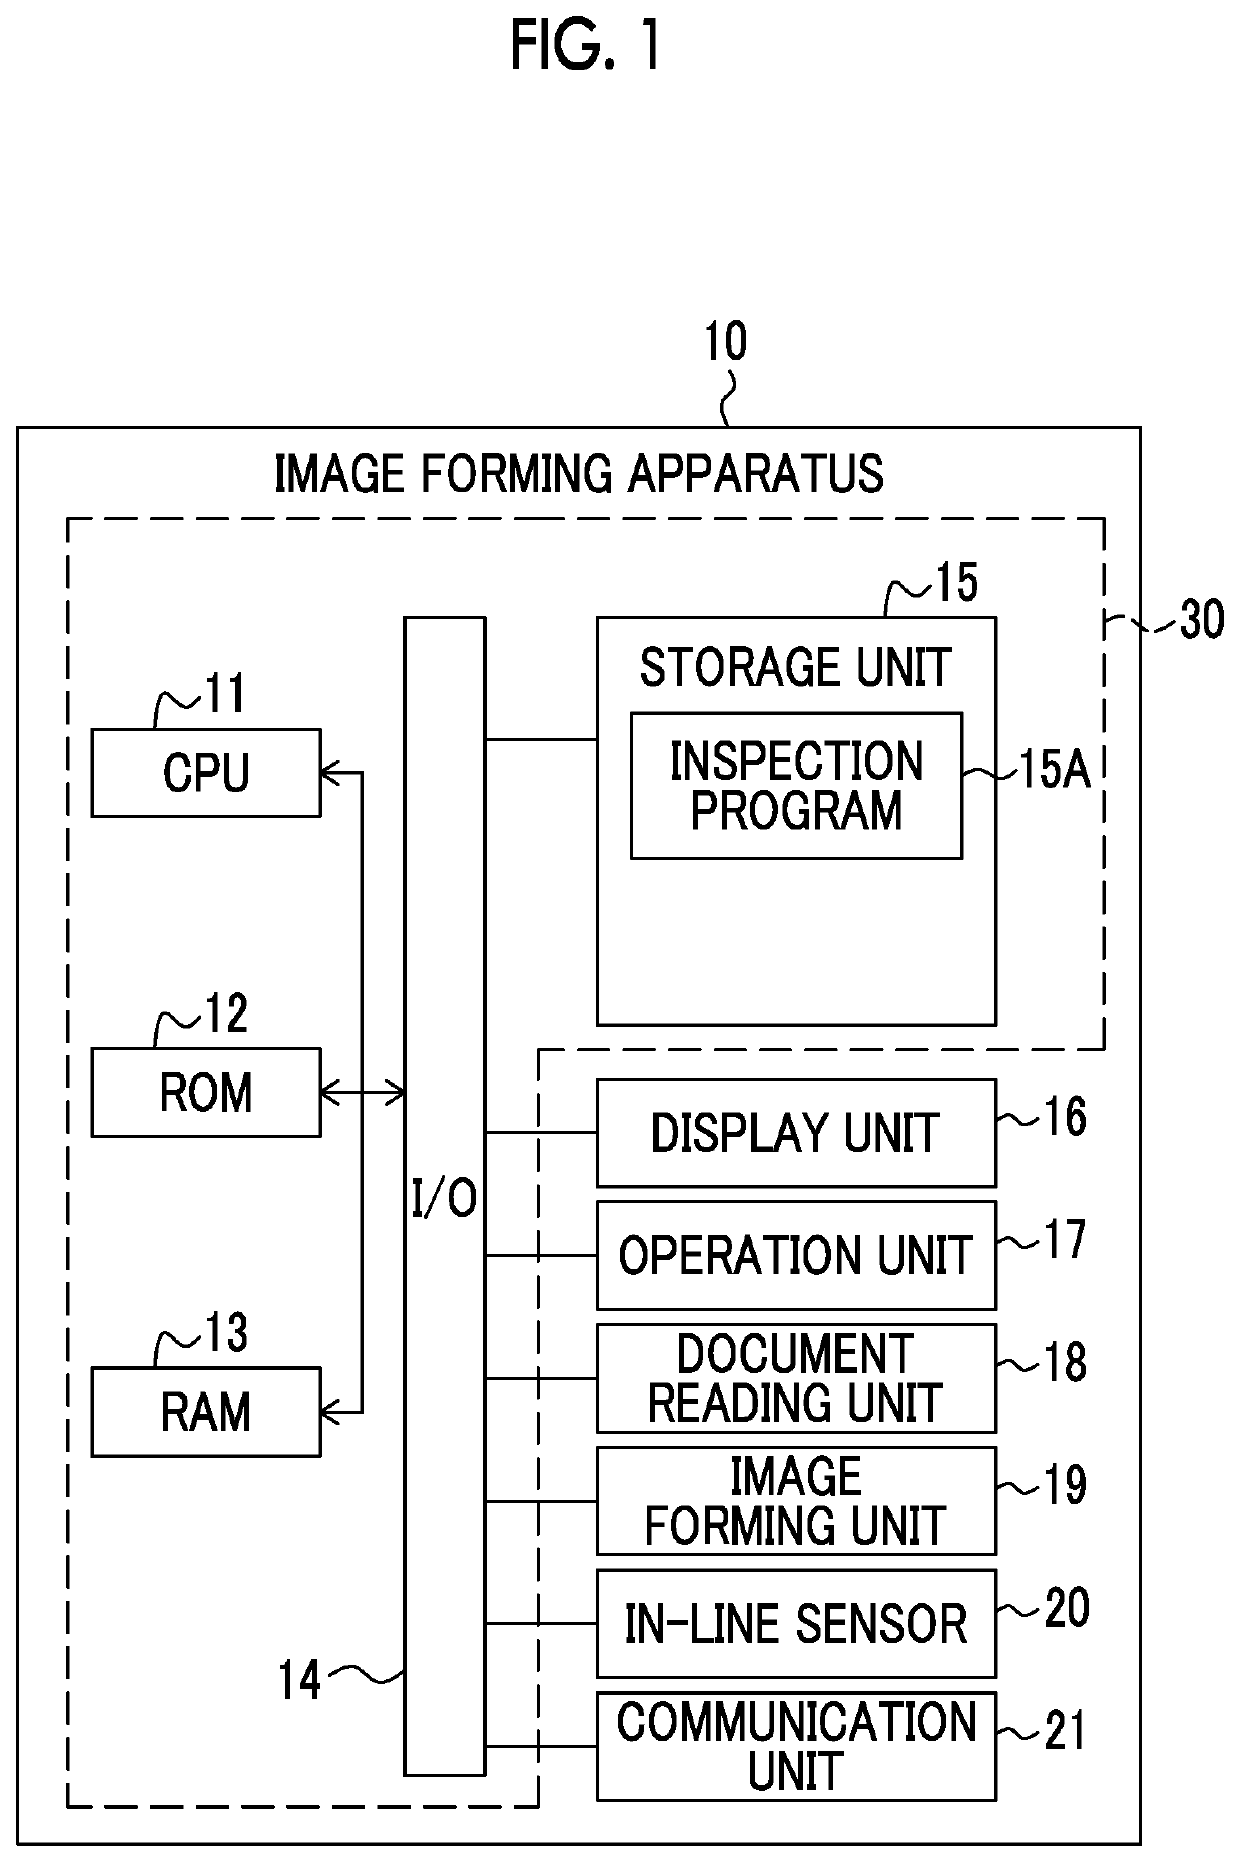 Inspection device, image forming apparatus, and non-transitory computer readable medium storing inspection program